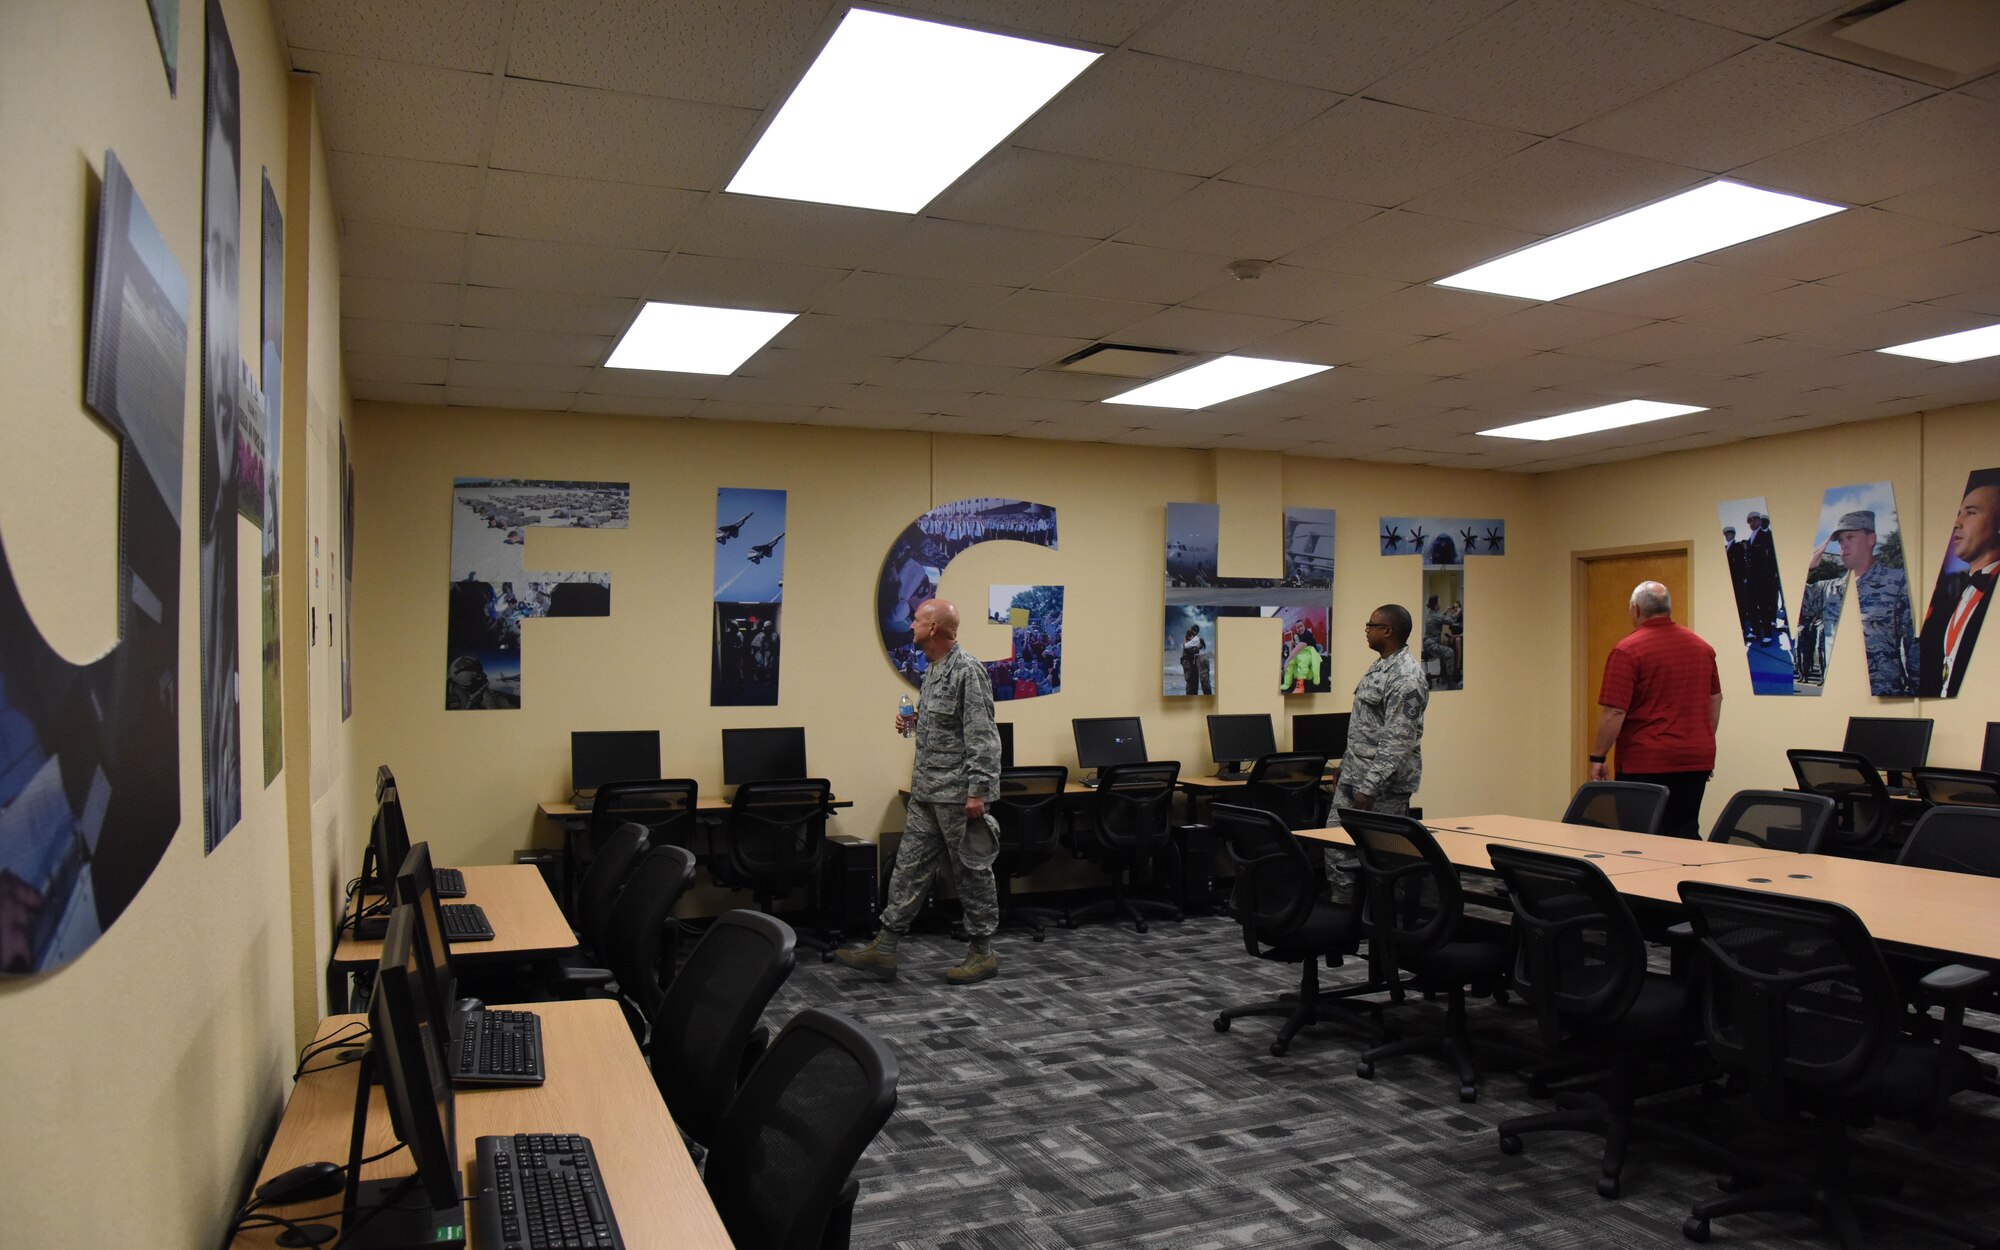 Keesler personnel view a renovated classroom inside the Professional Development Center during the grand reopening and ribbon cutting ceremony May 17, 2017, on Keesler Air Force Base, Miss. The facility offers developmental opportunities and various courses that fit the needs of officers, enlisted, civilians or reservists. (U.S. Air Force photo by Kemberly Groue)